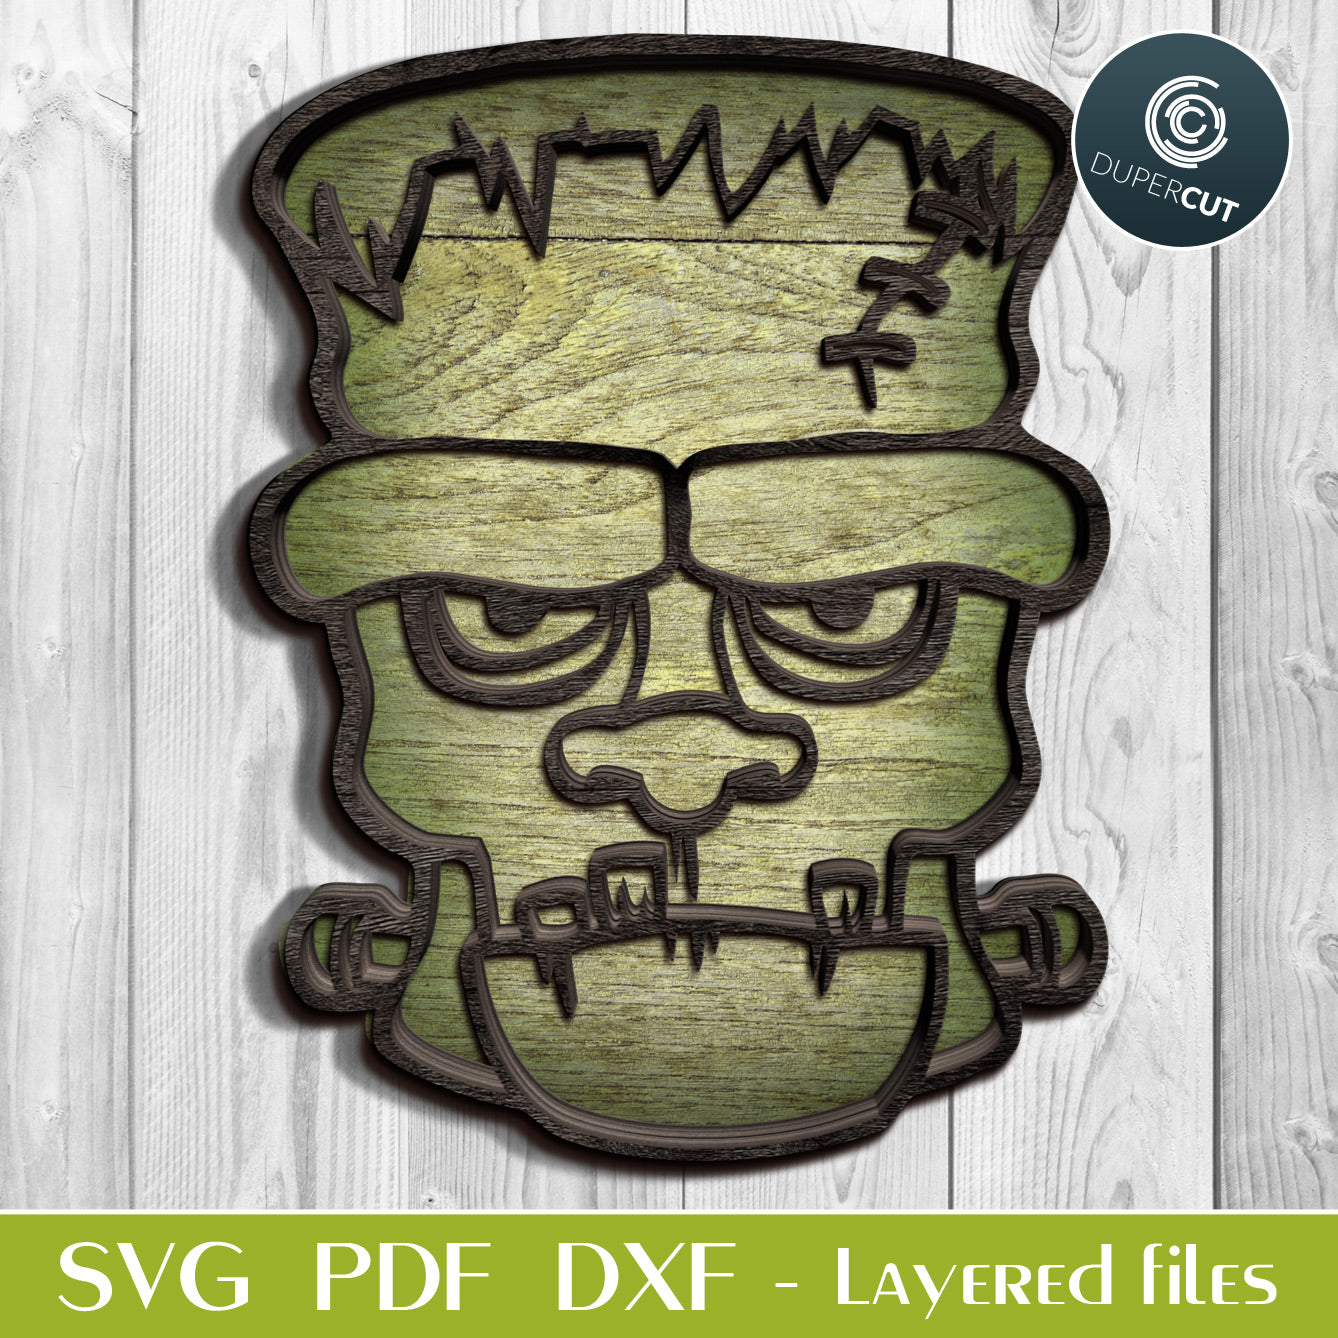 Frankestein face - layered Halloween cutting files, SVG PDF DXF template for laser cutting, engraving, Glowforge, Cricut, Silhouette